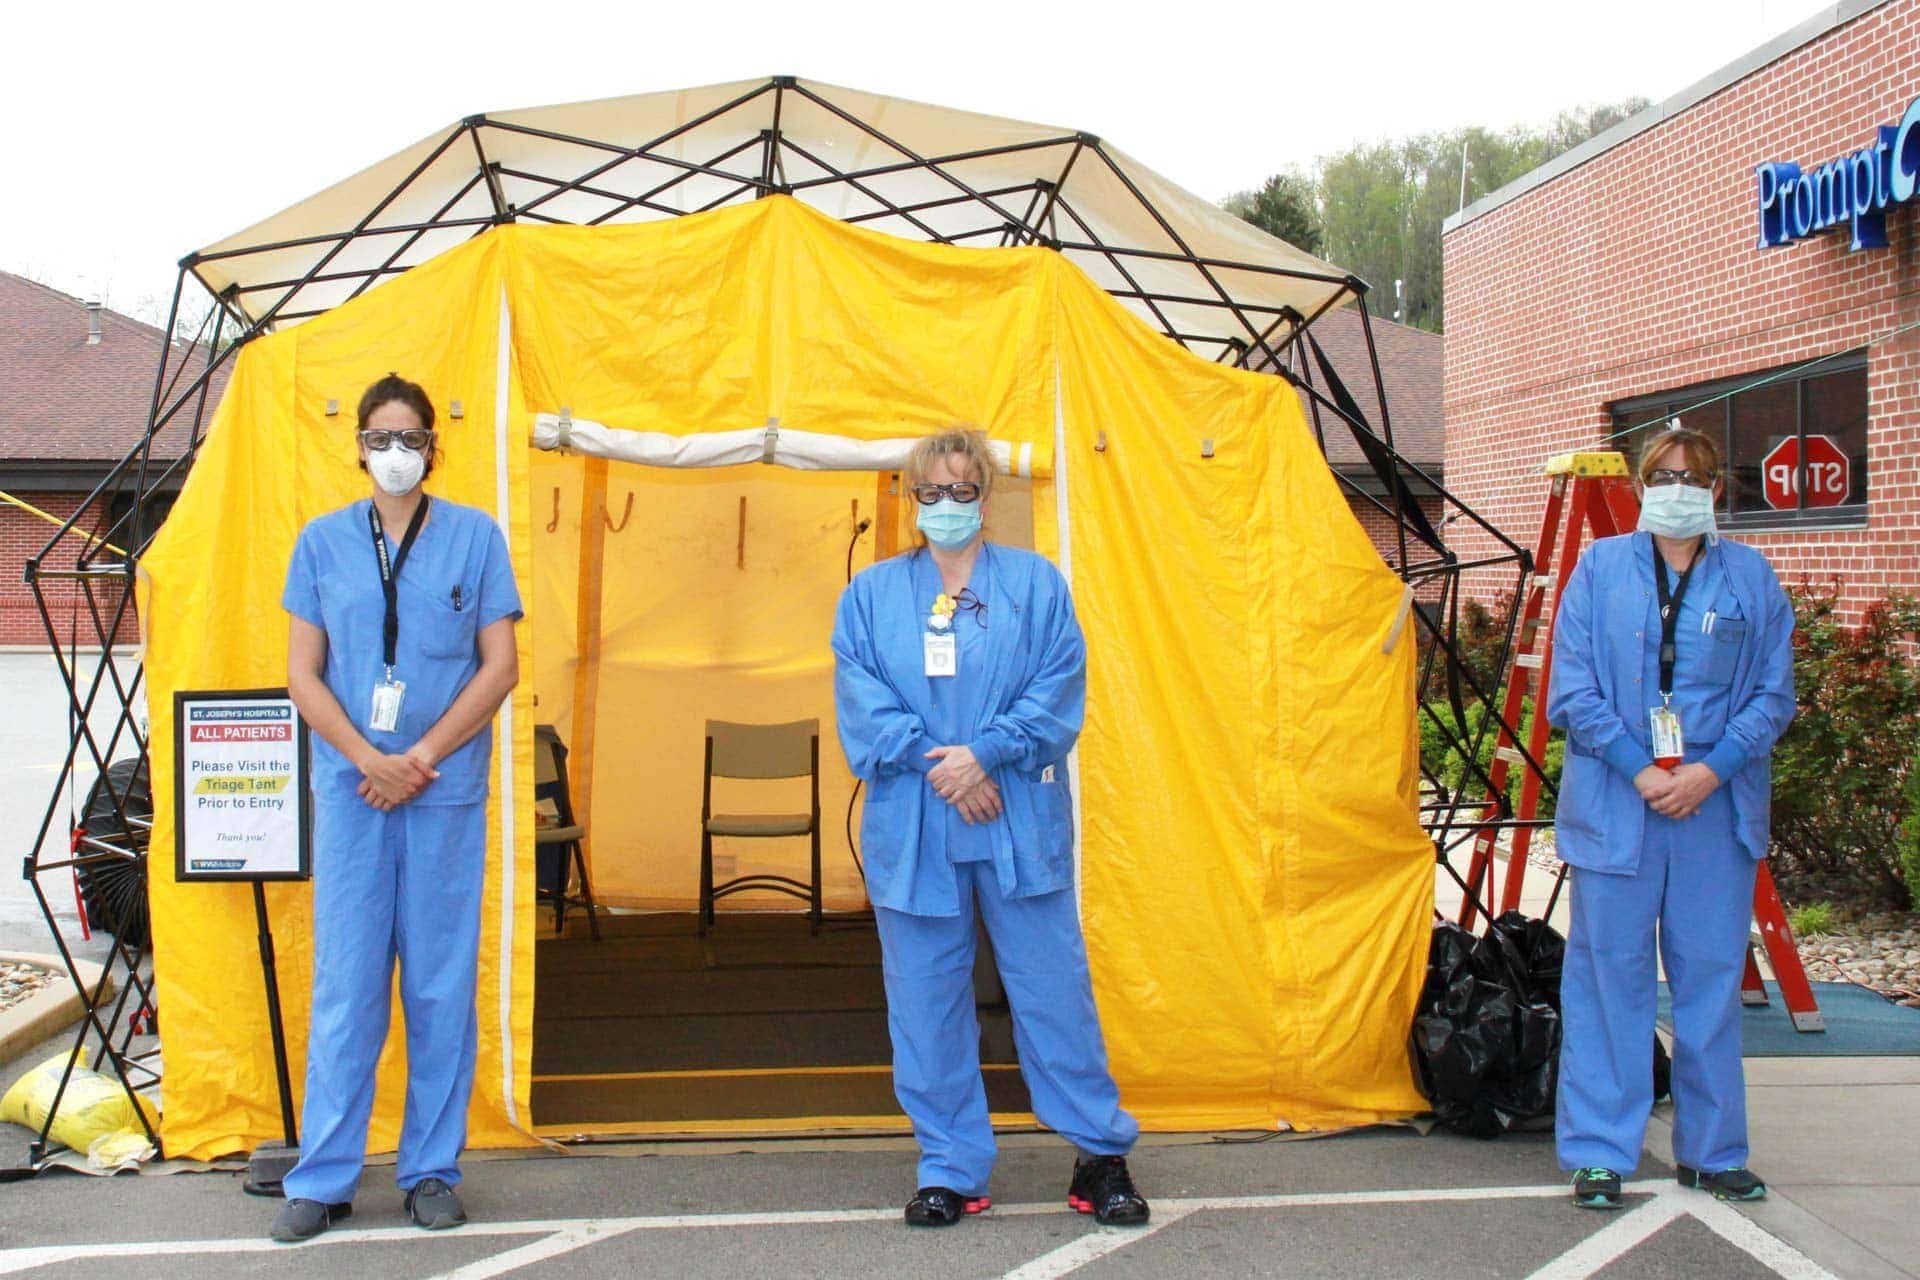 Nurses at our Triage Tent